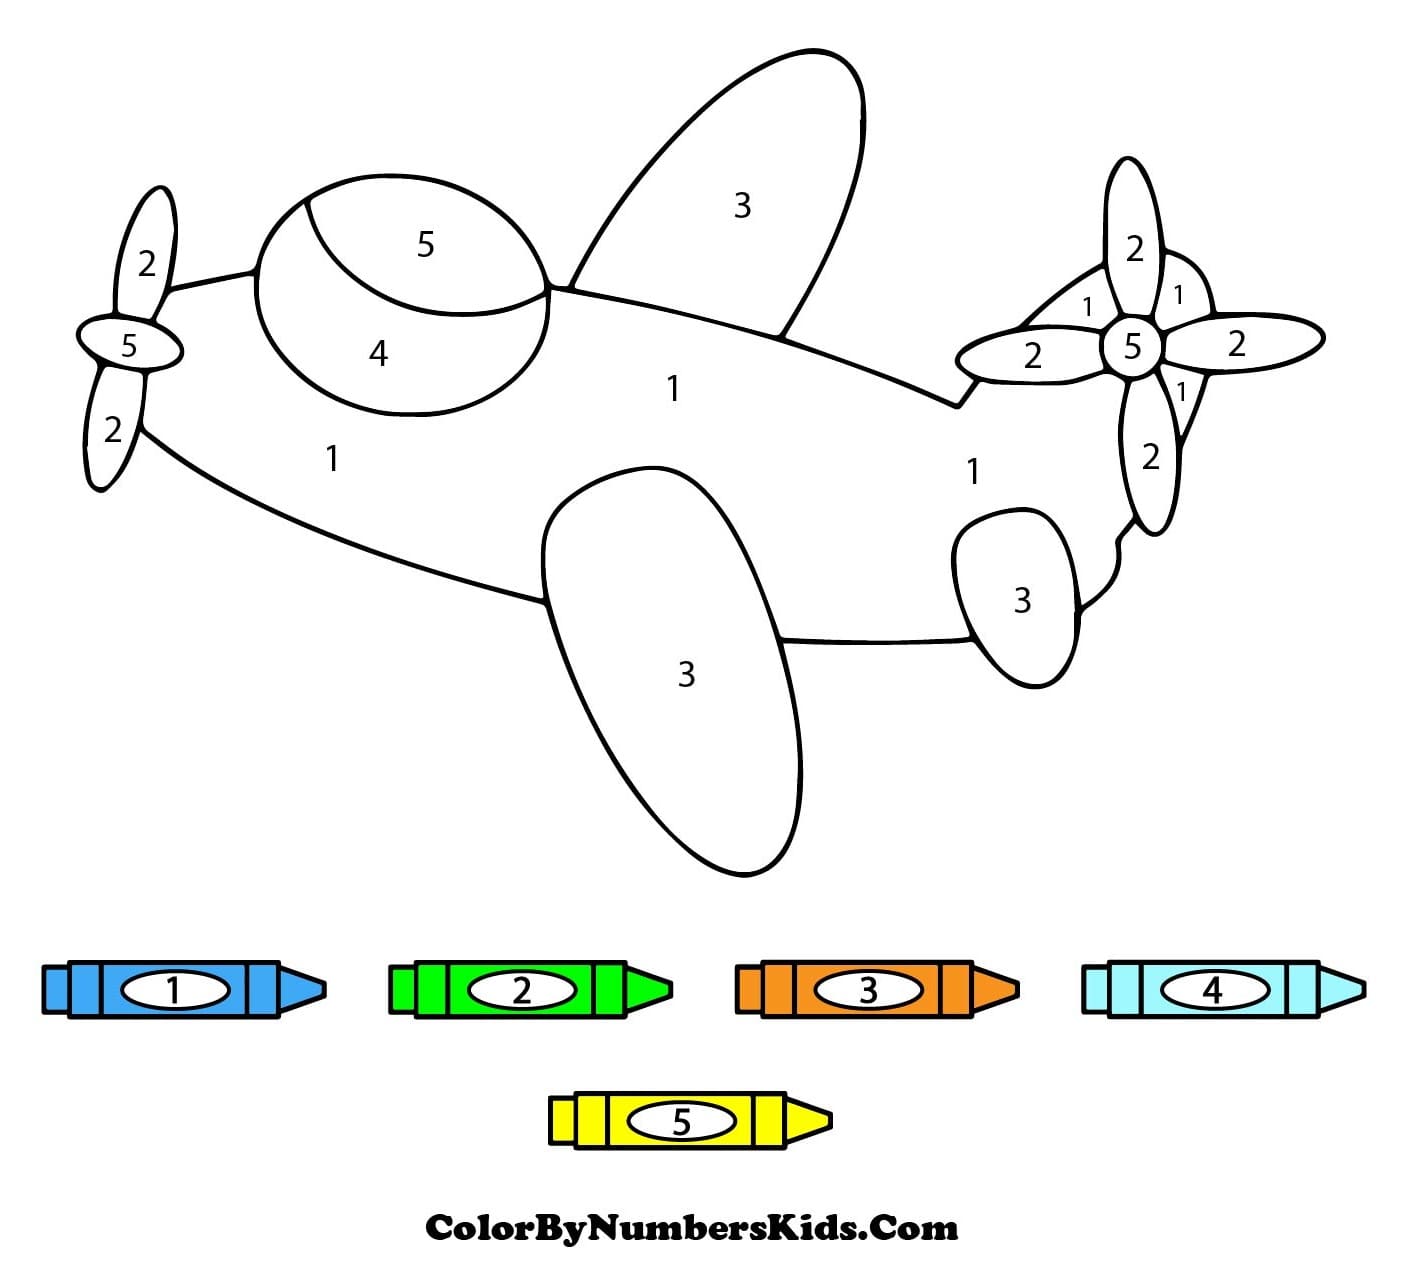 Toy Plane Color By Number for Kids